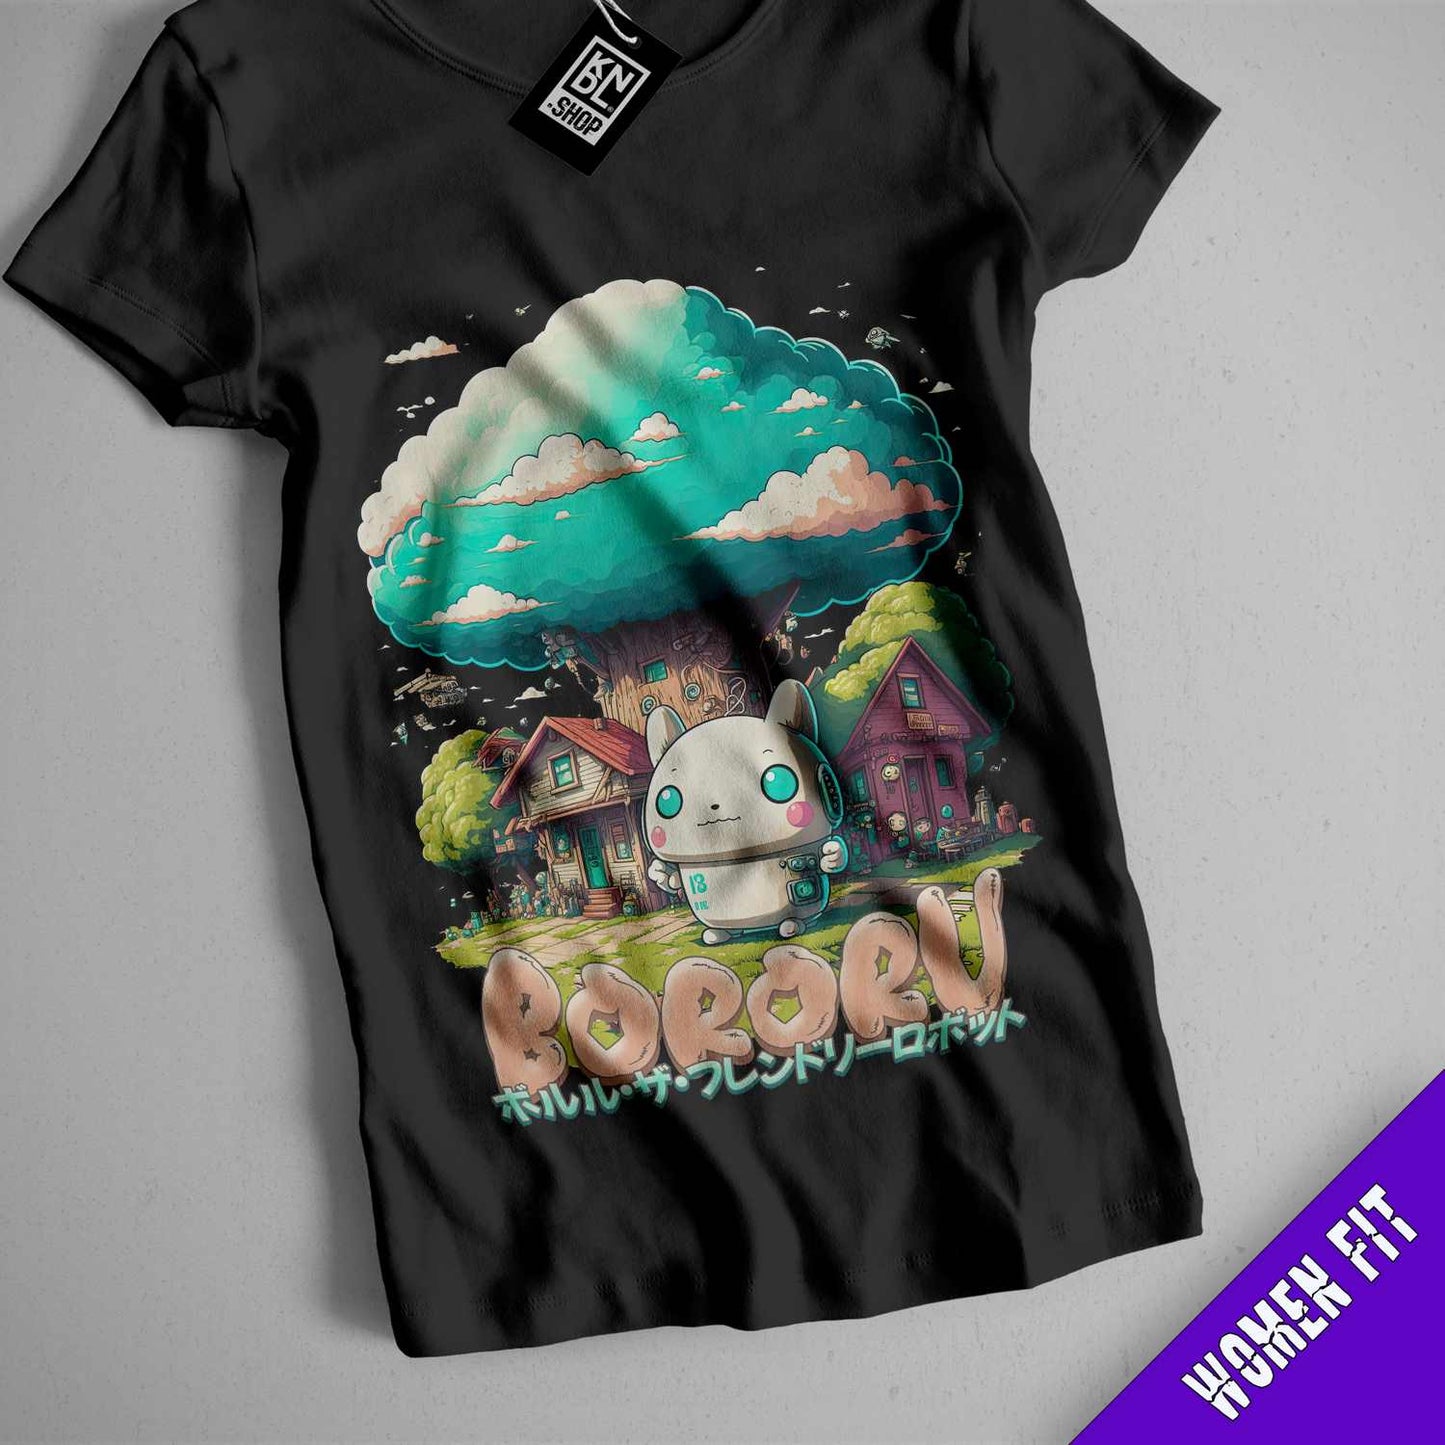 a black t - shirt with an image of a mushroom house